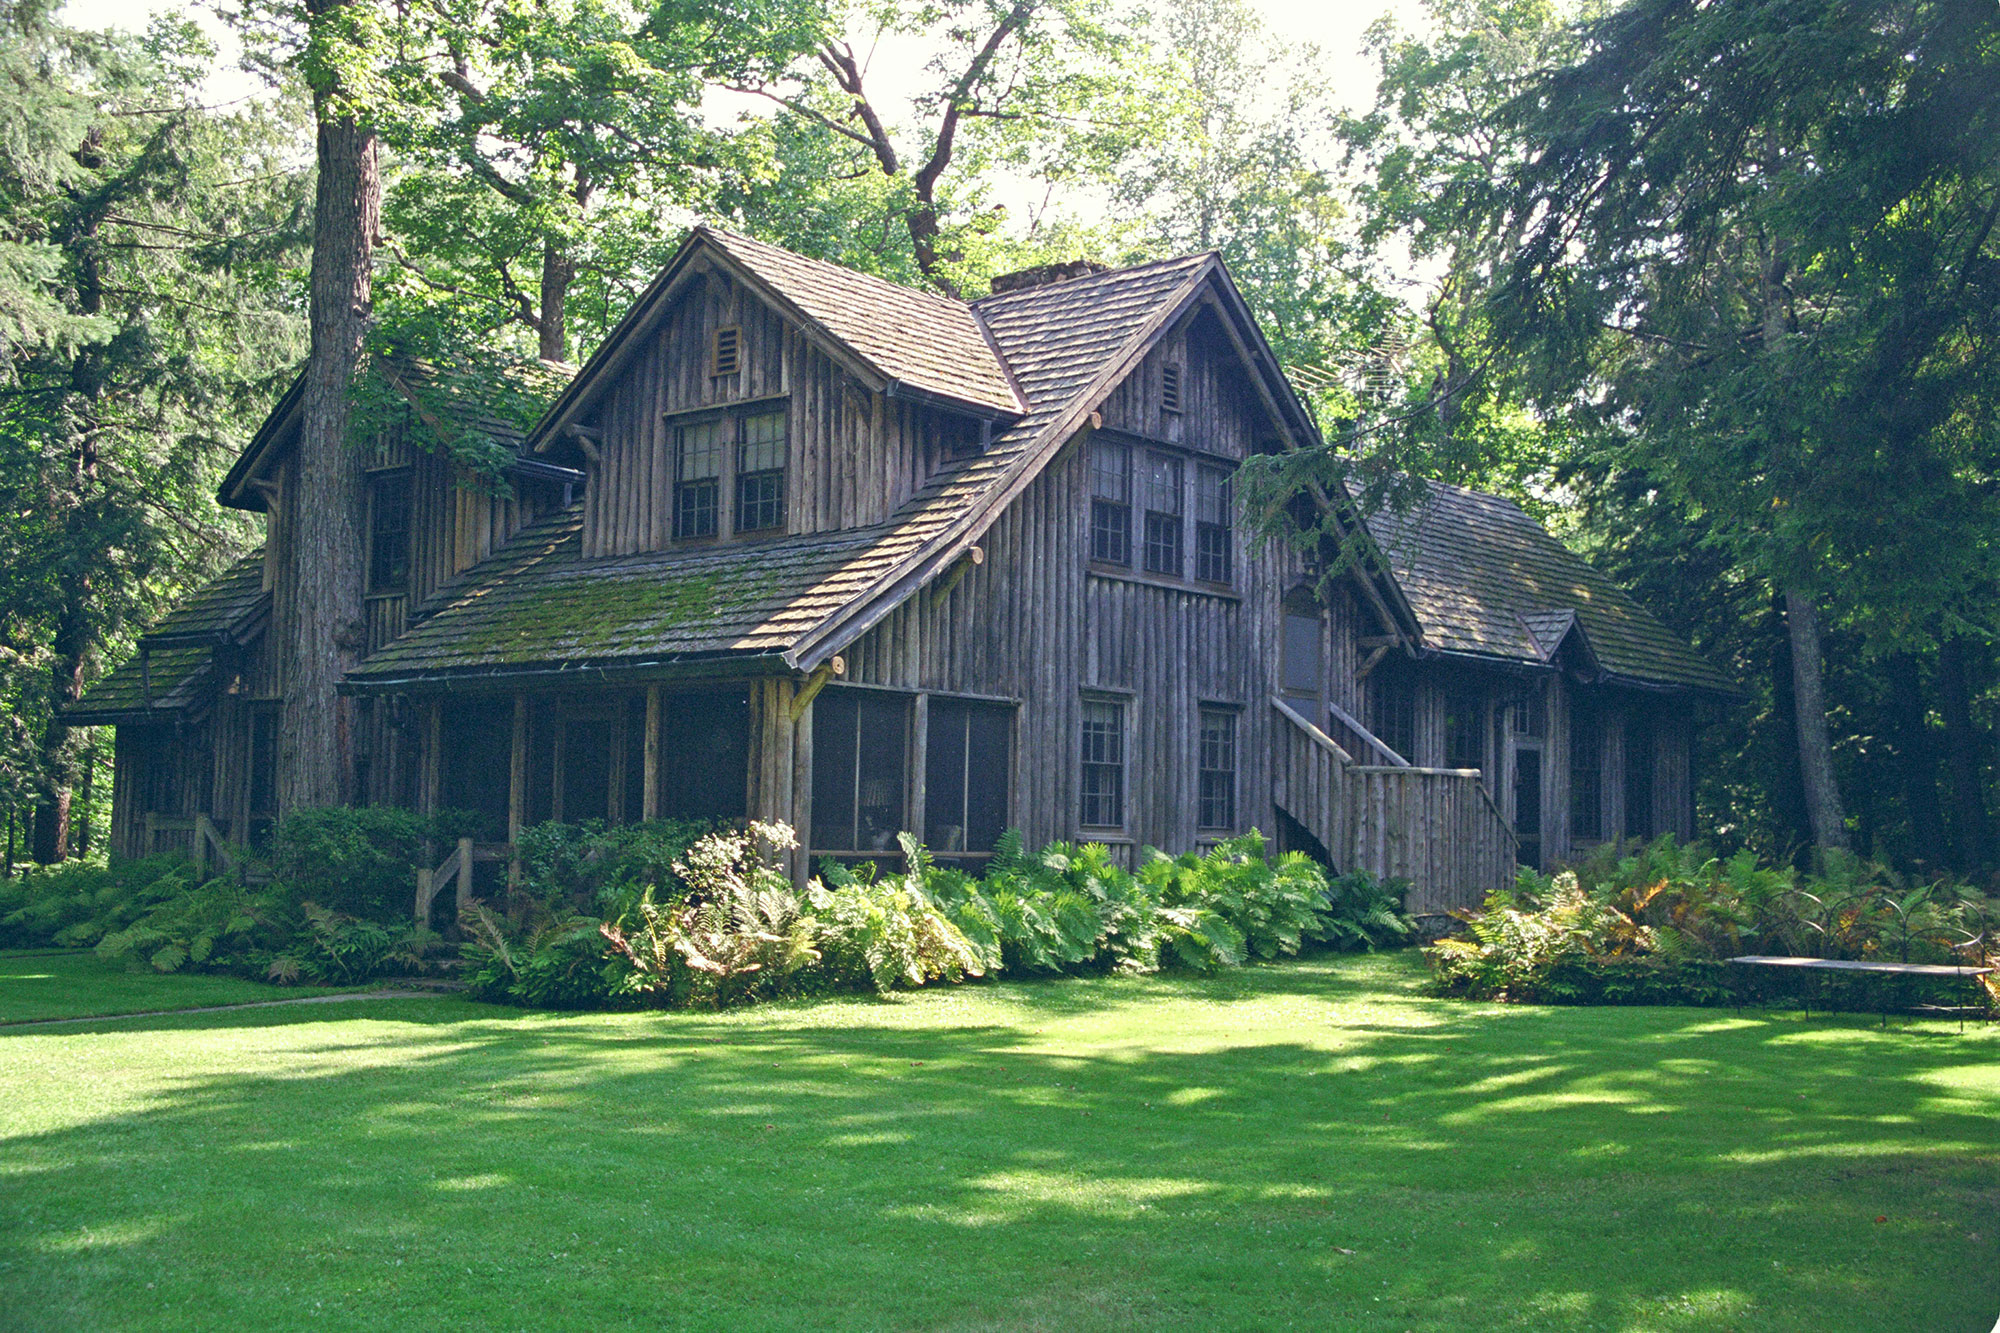 A wooden house surrounded by green grass and trees.